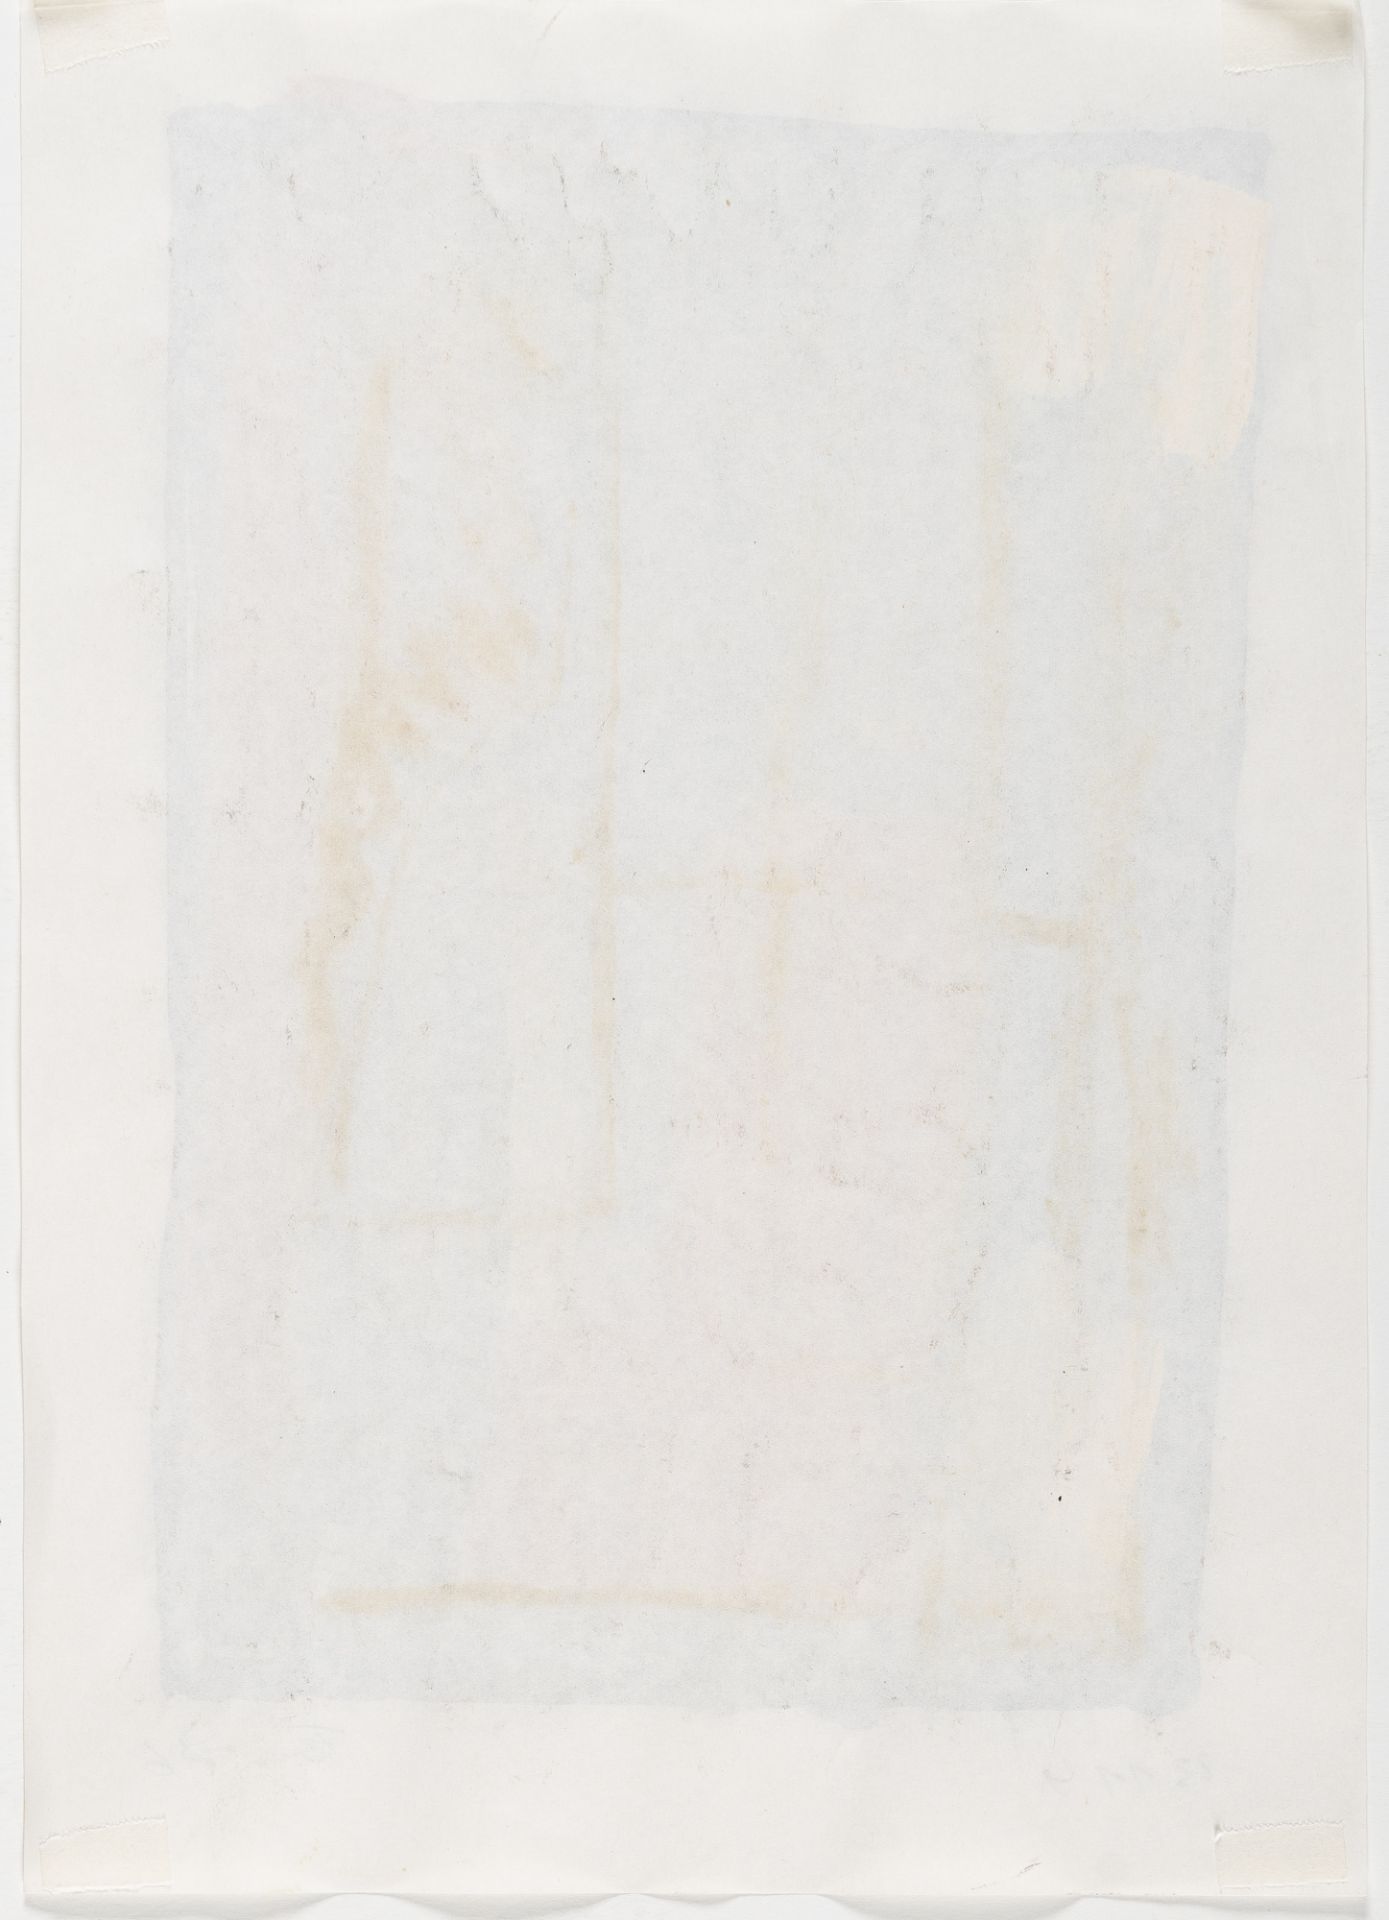 Günther Förg (1952 Füssen - Freiburg i. Br. 2013) – Untitled.Gouache and oil crayon, partly with - Image 7 of 11